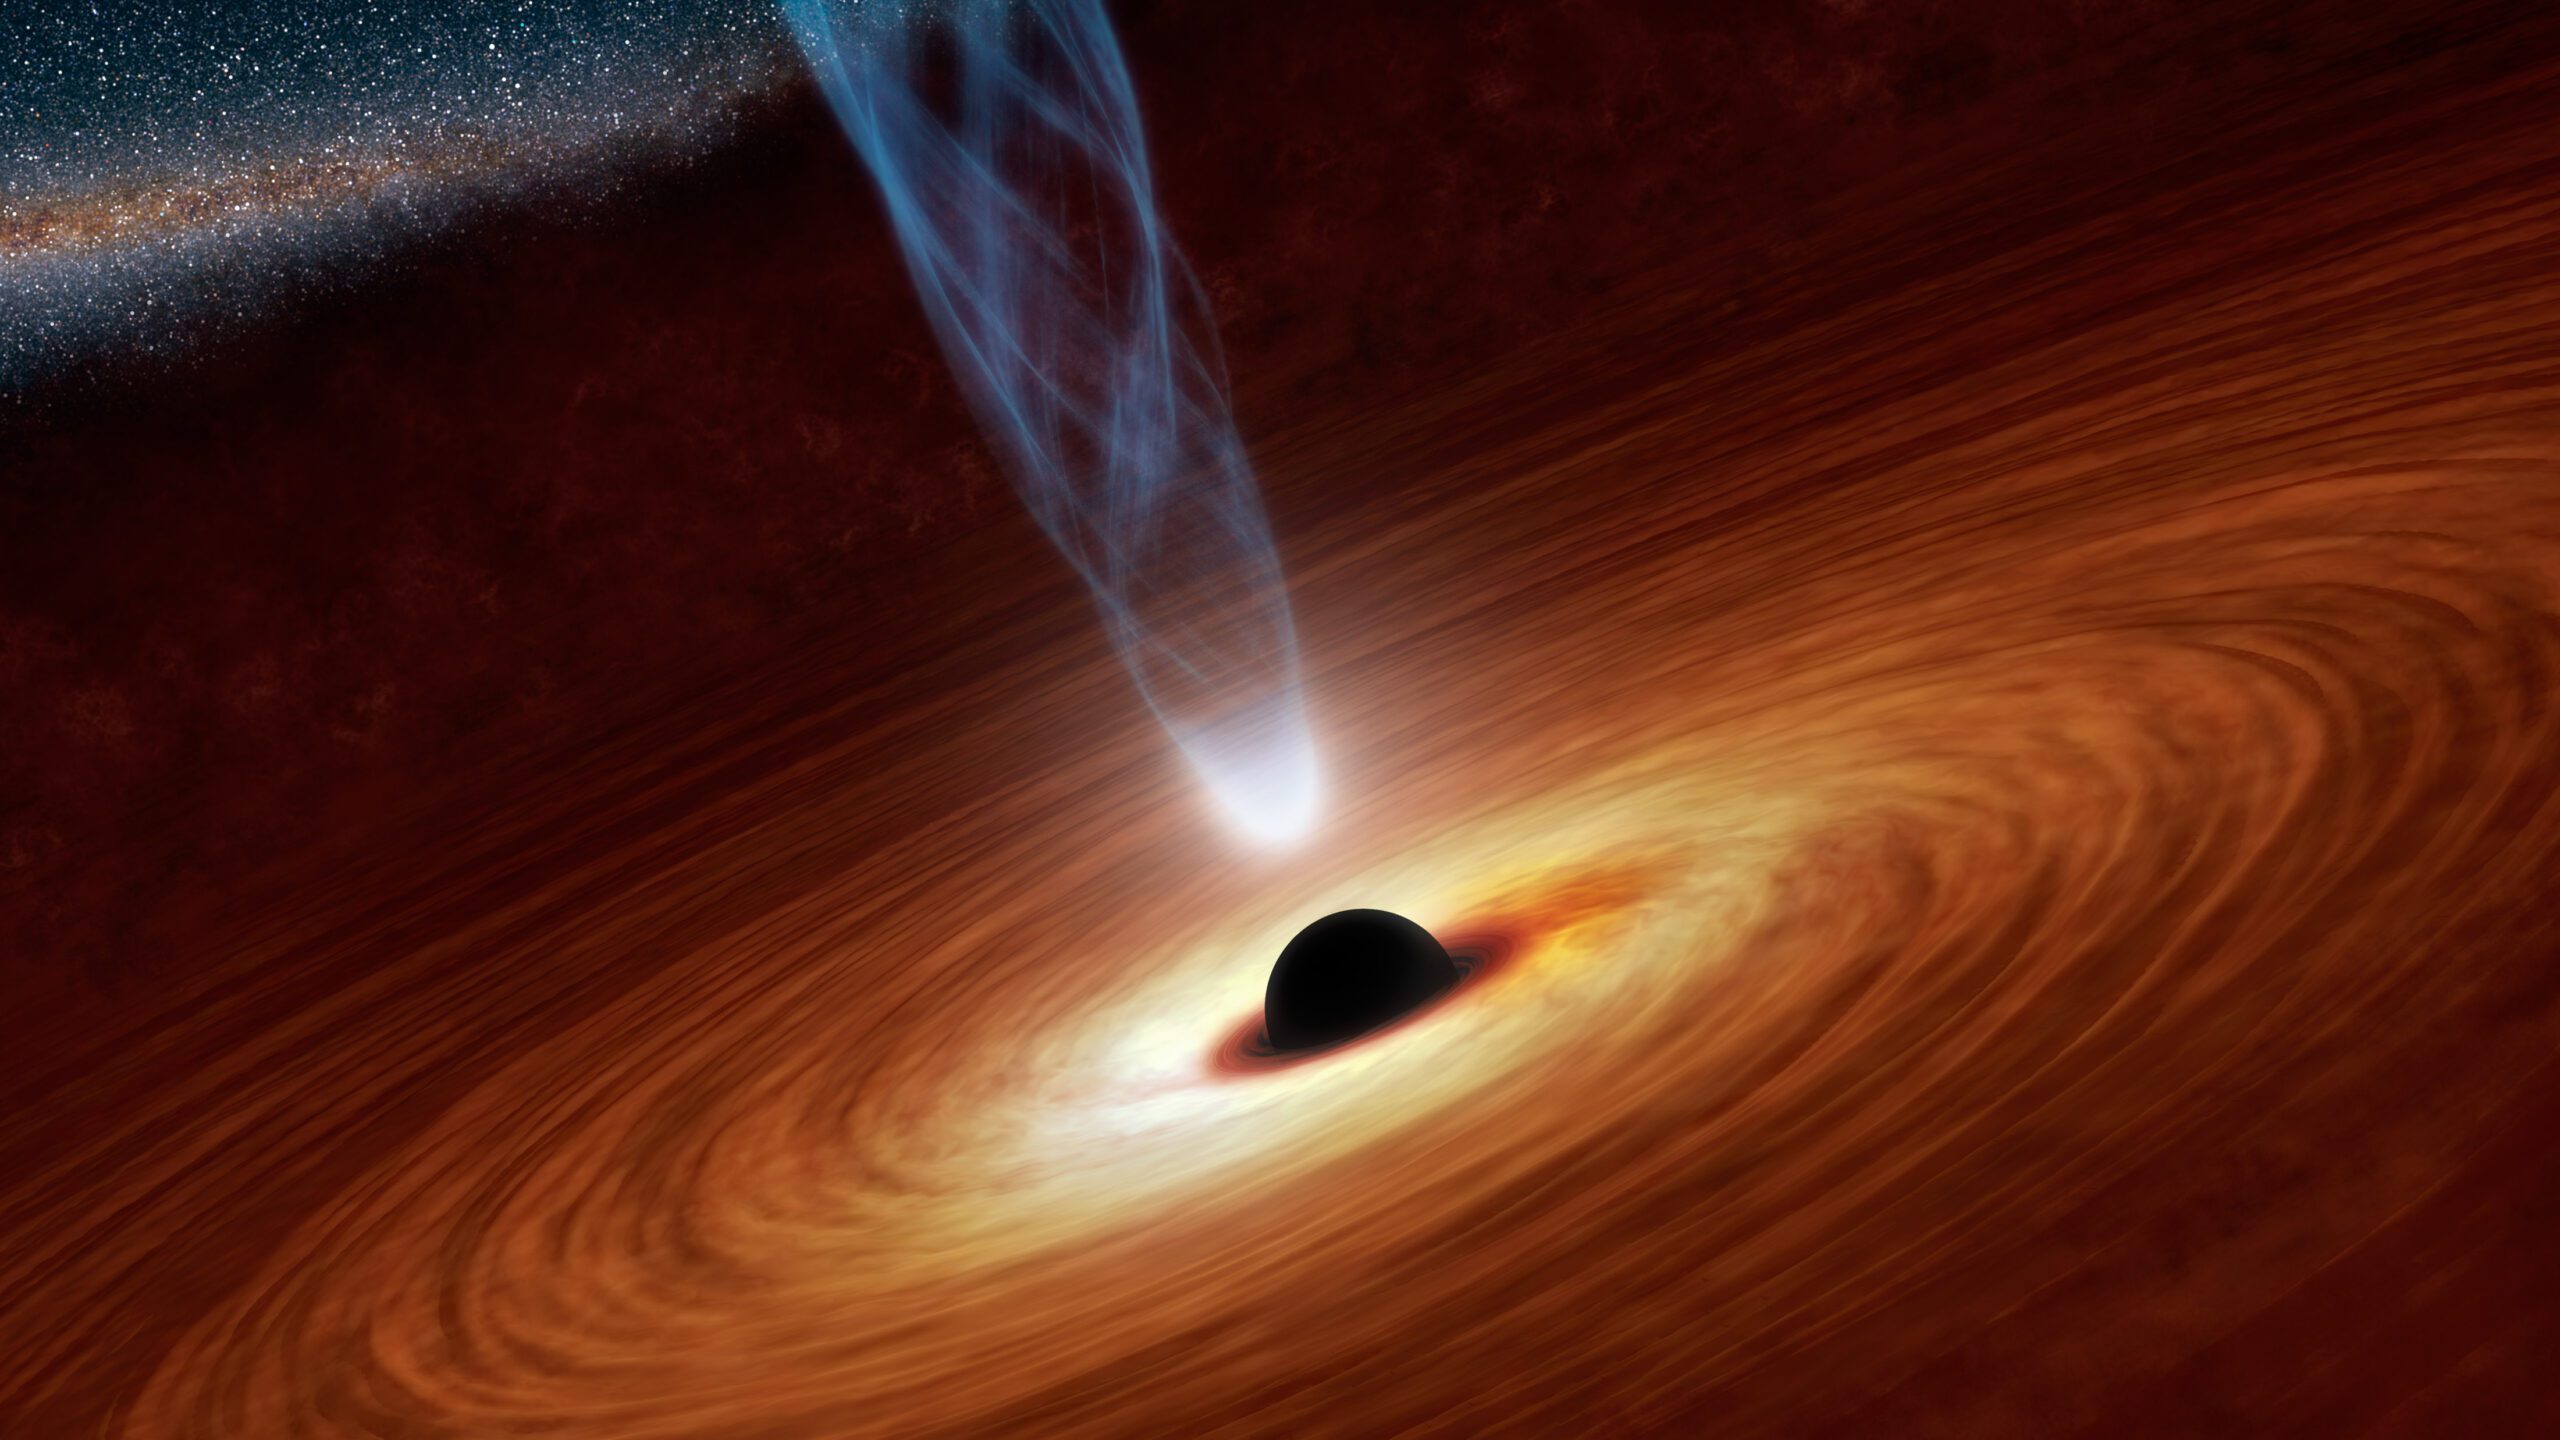 How the world came to understand black holes